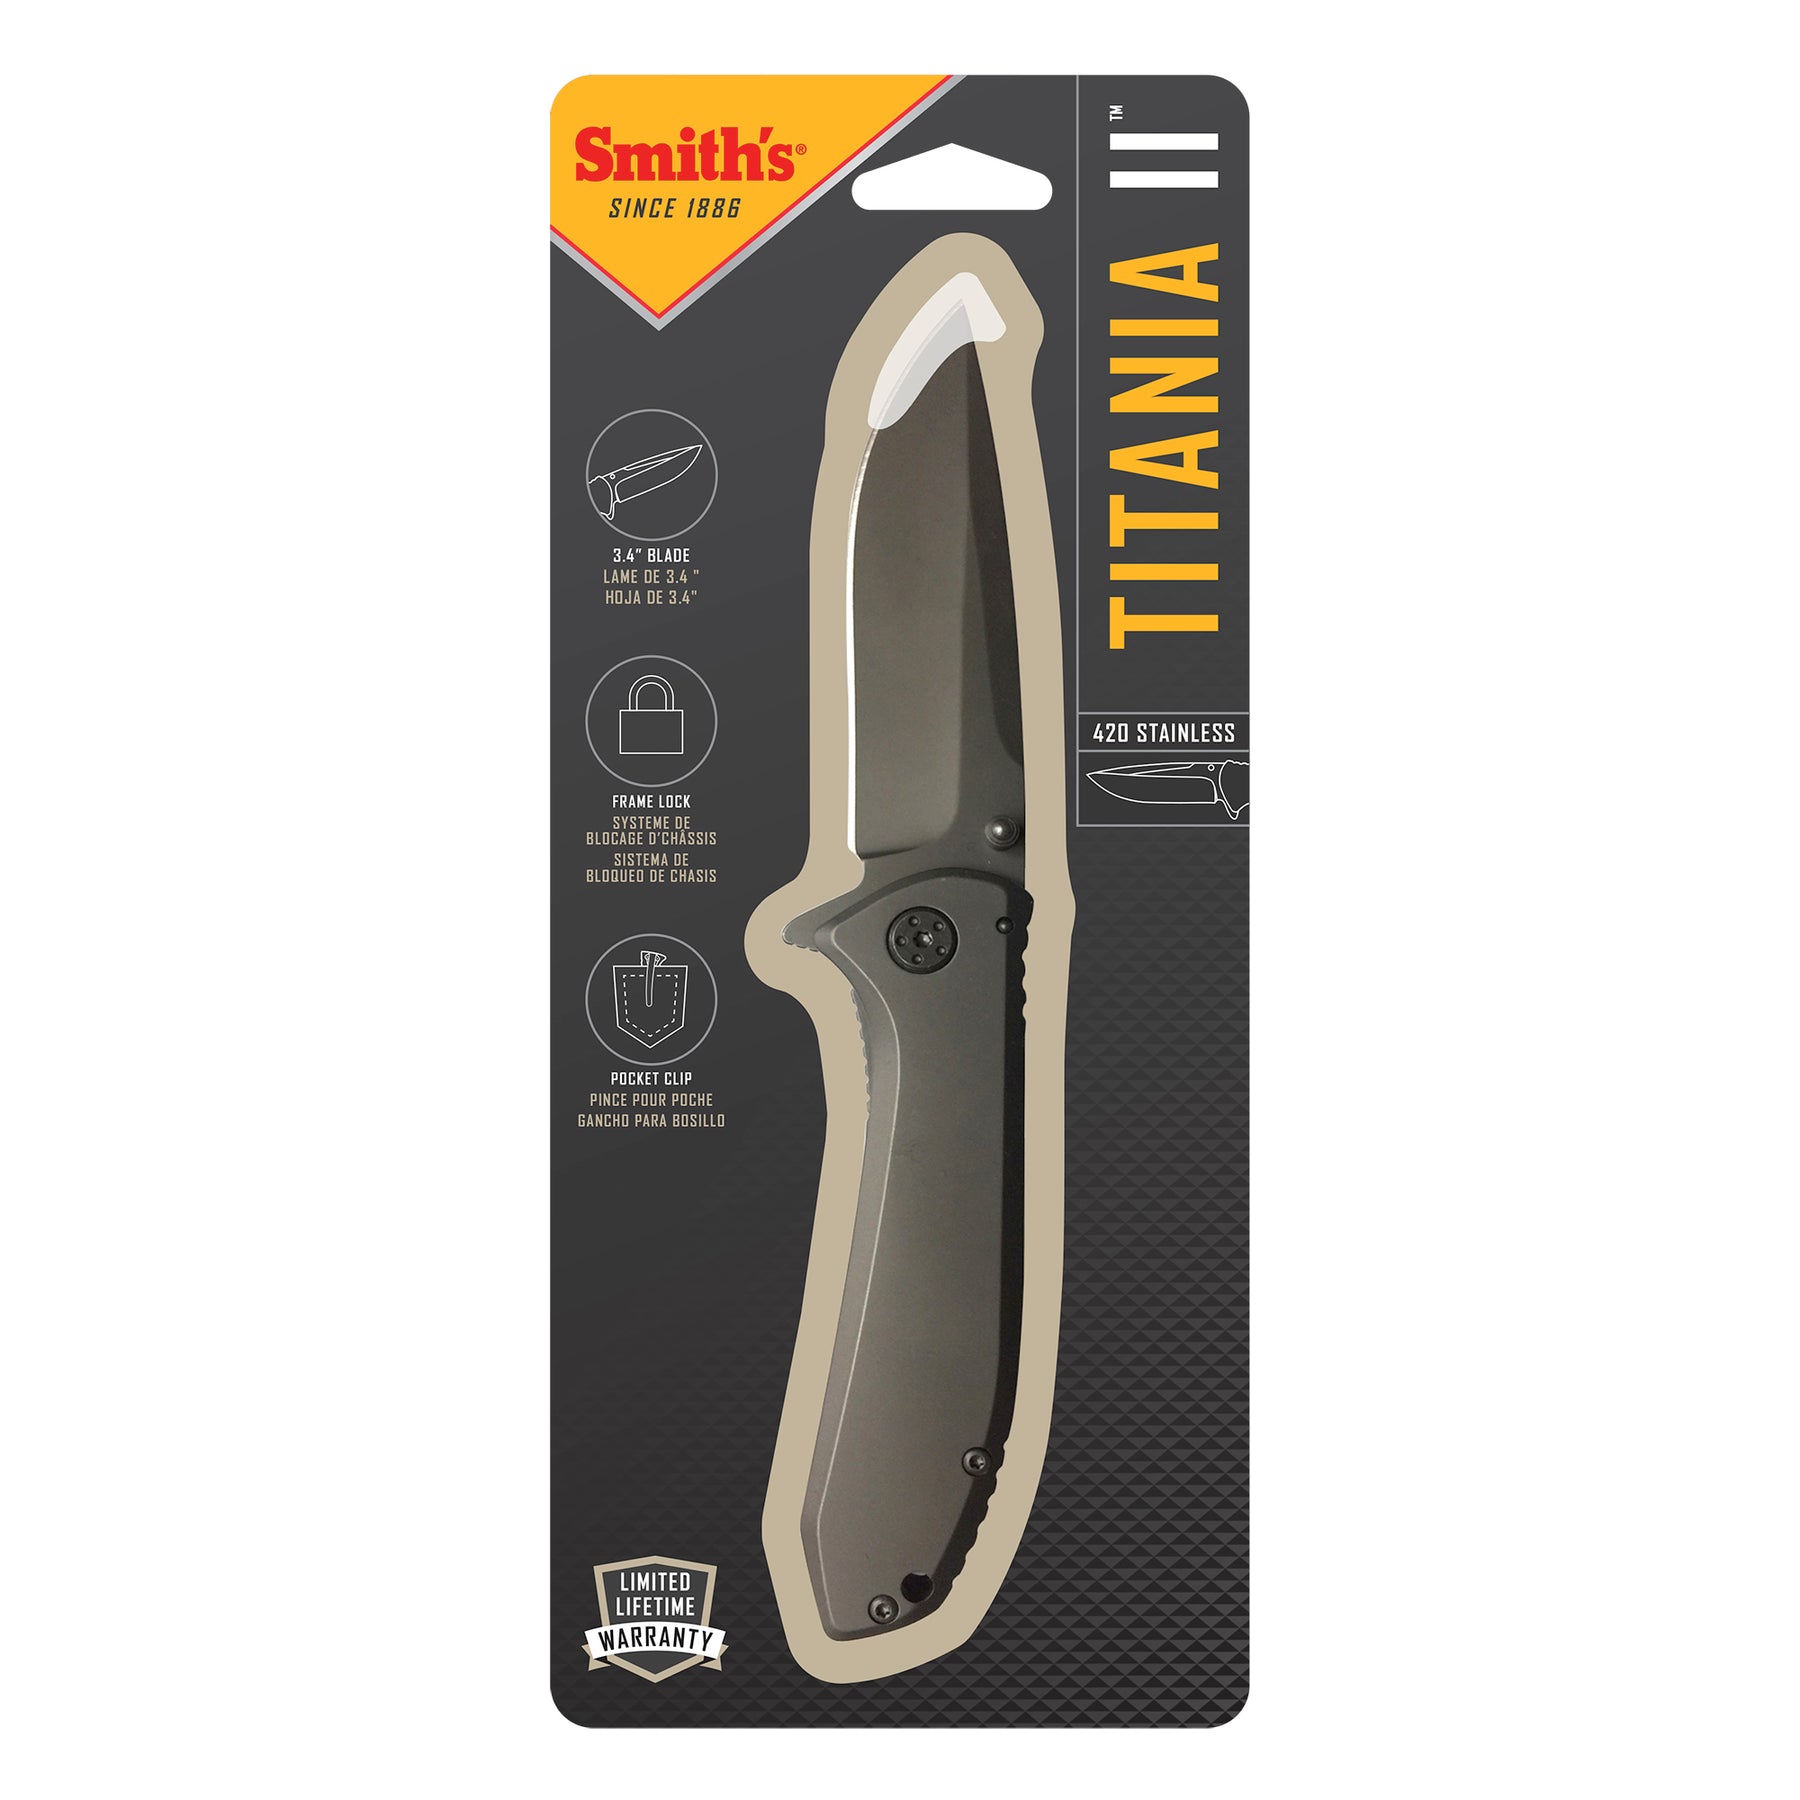 Smith's Consumer Products Store. SM KNIFE & TOOL SHP